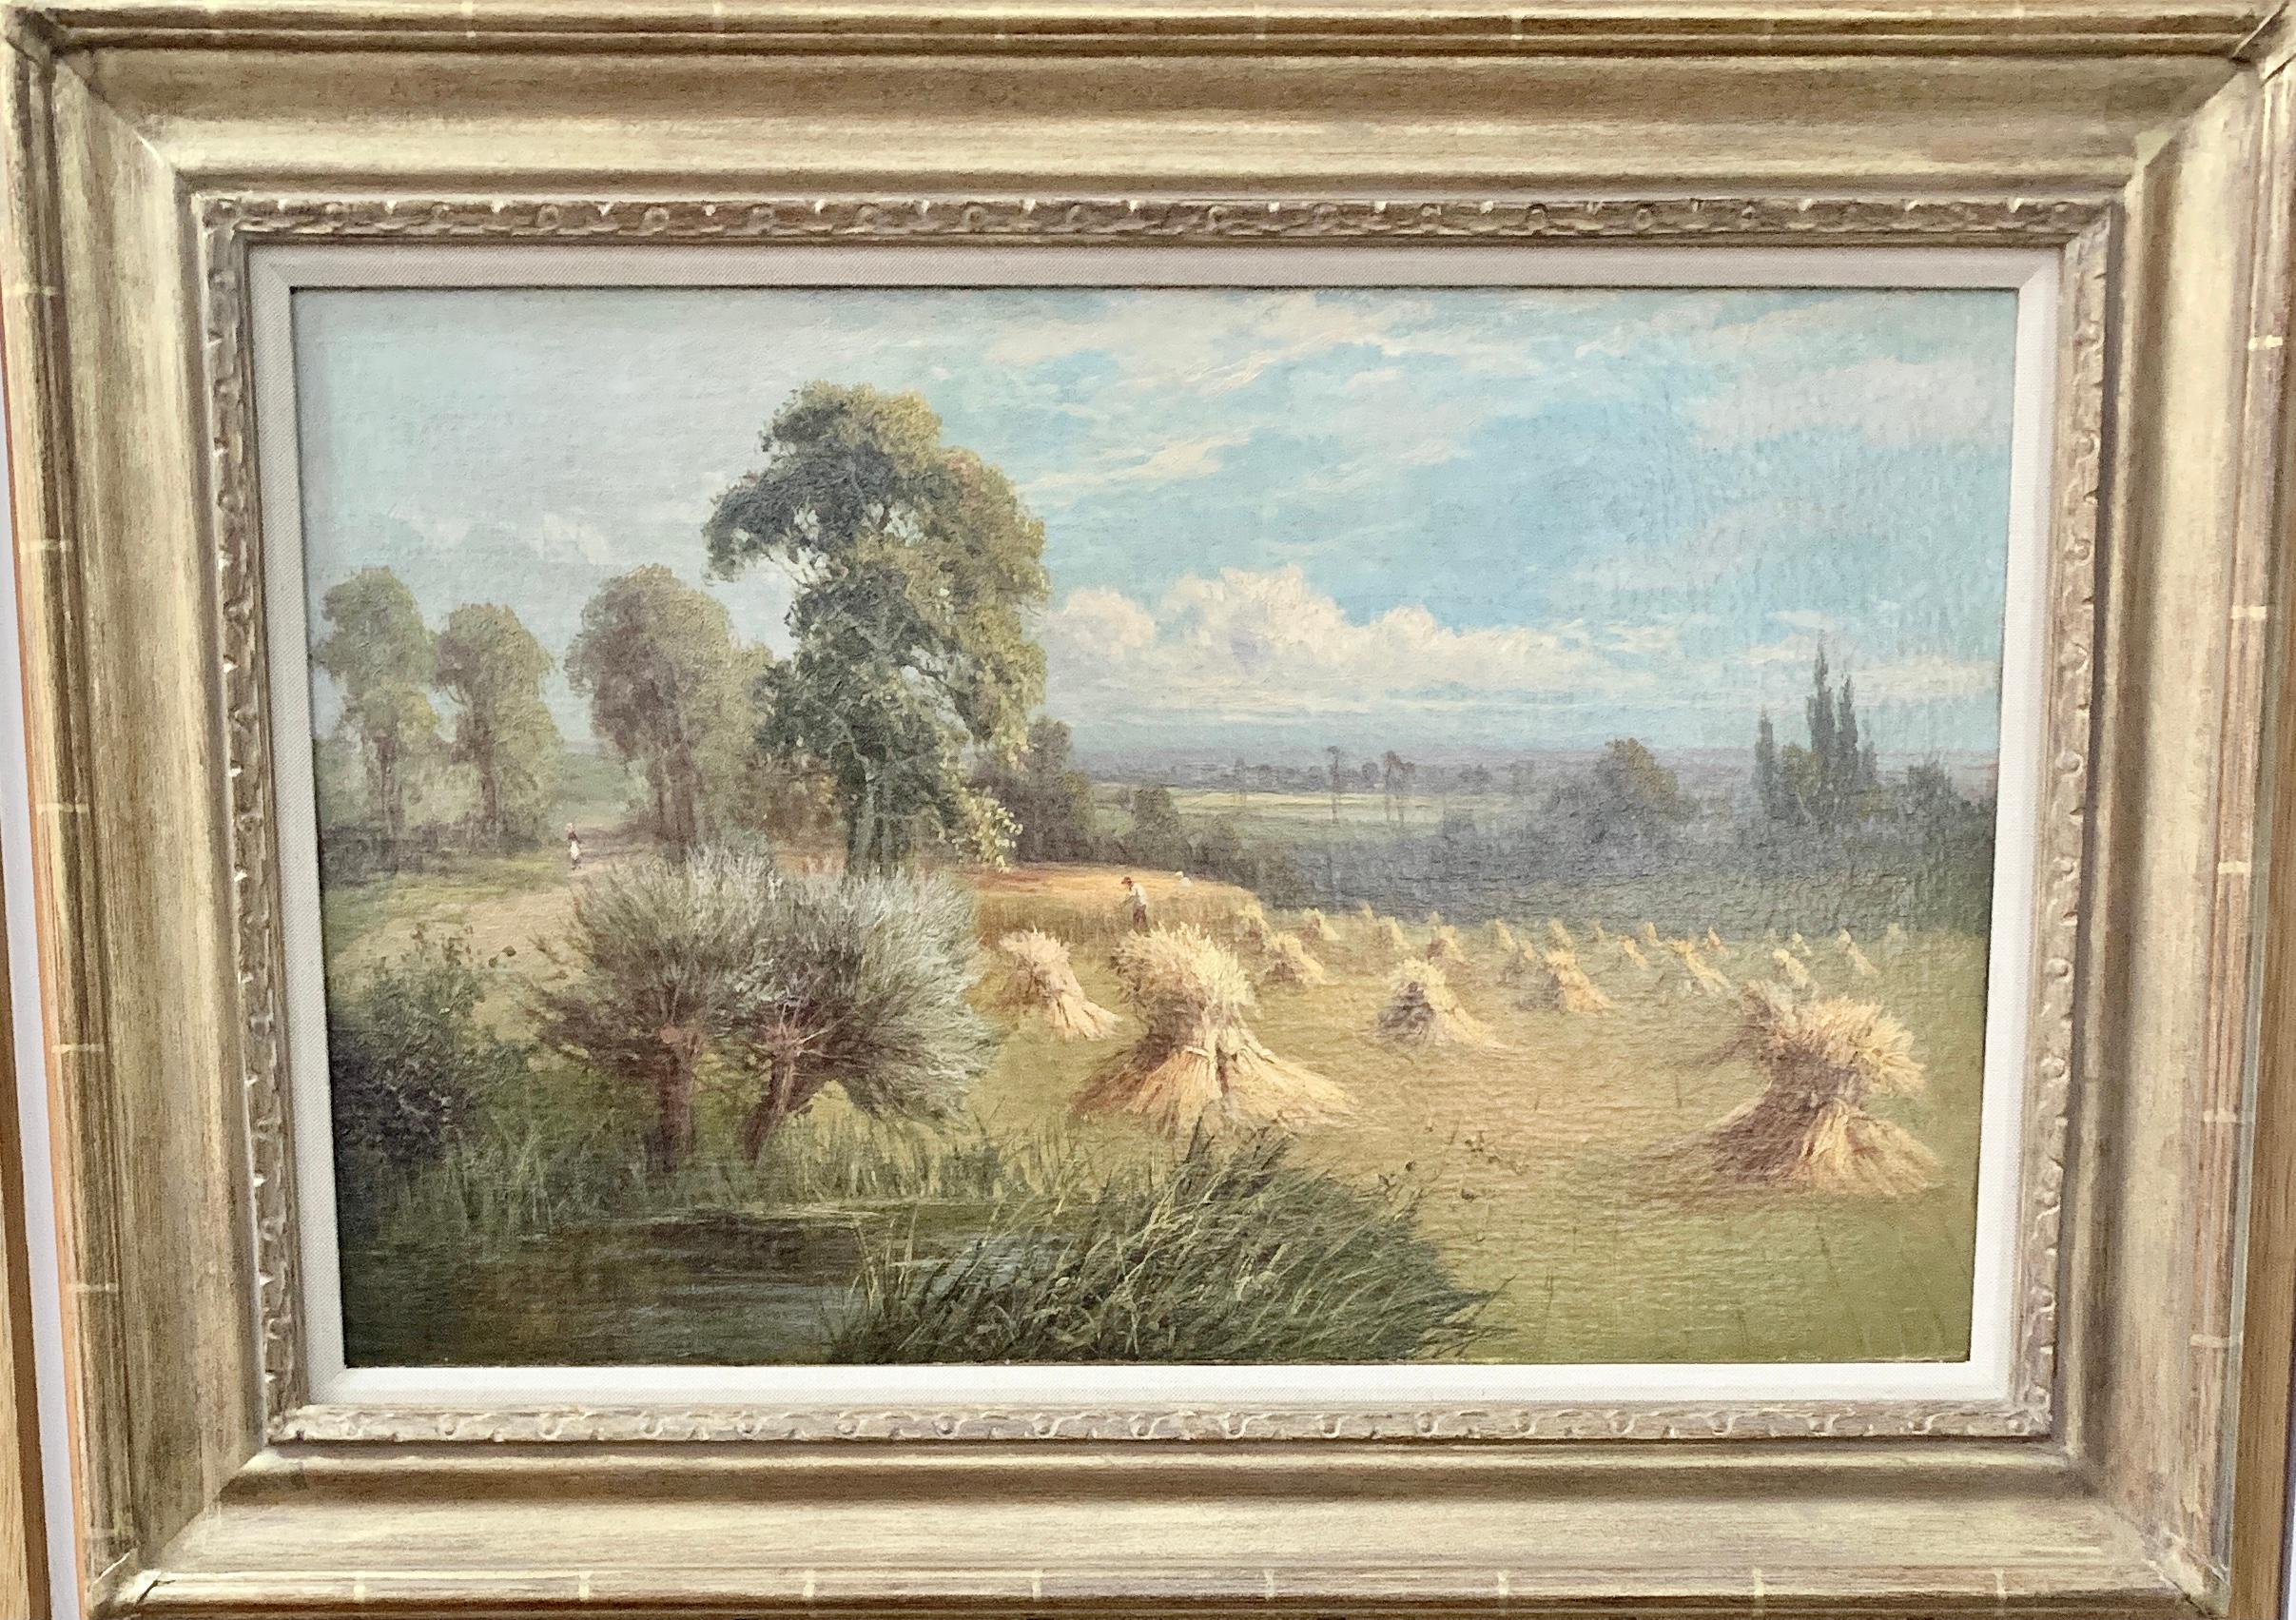 Sidney Yates Johnson Figurative Painting - English 19th century landscape with farmers harvesting the hay, pond and Willow.